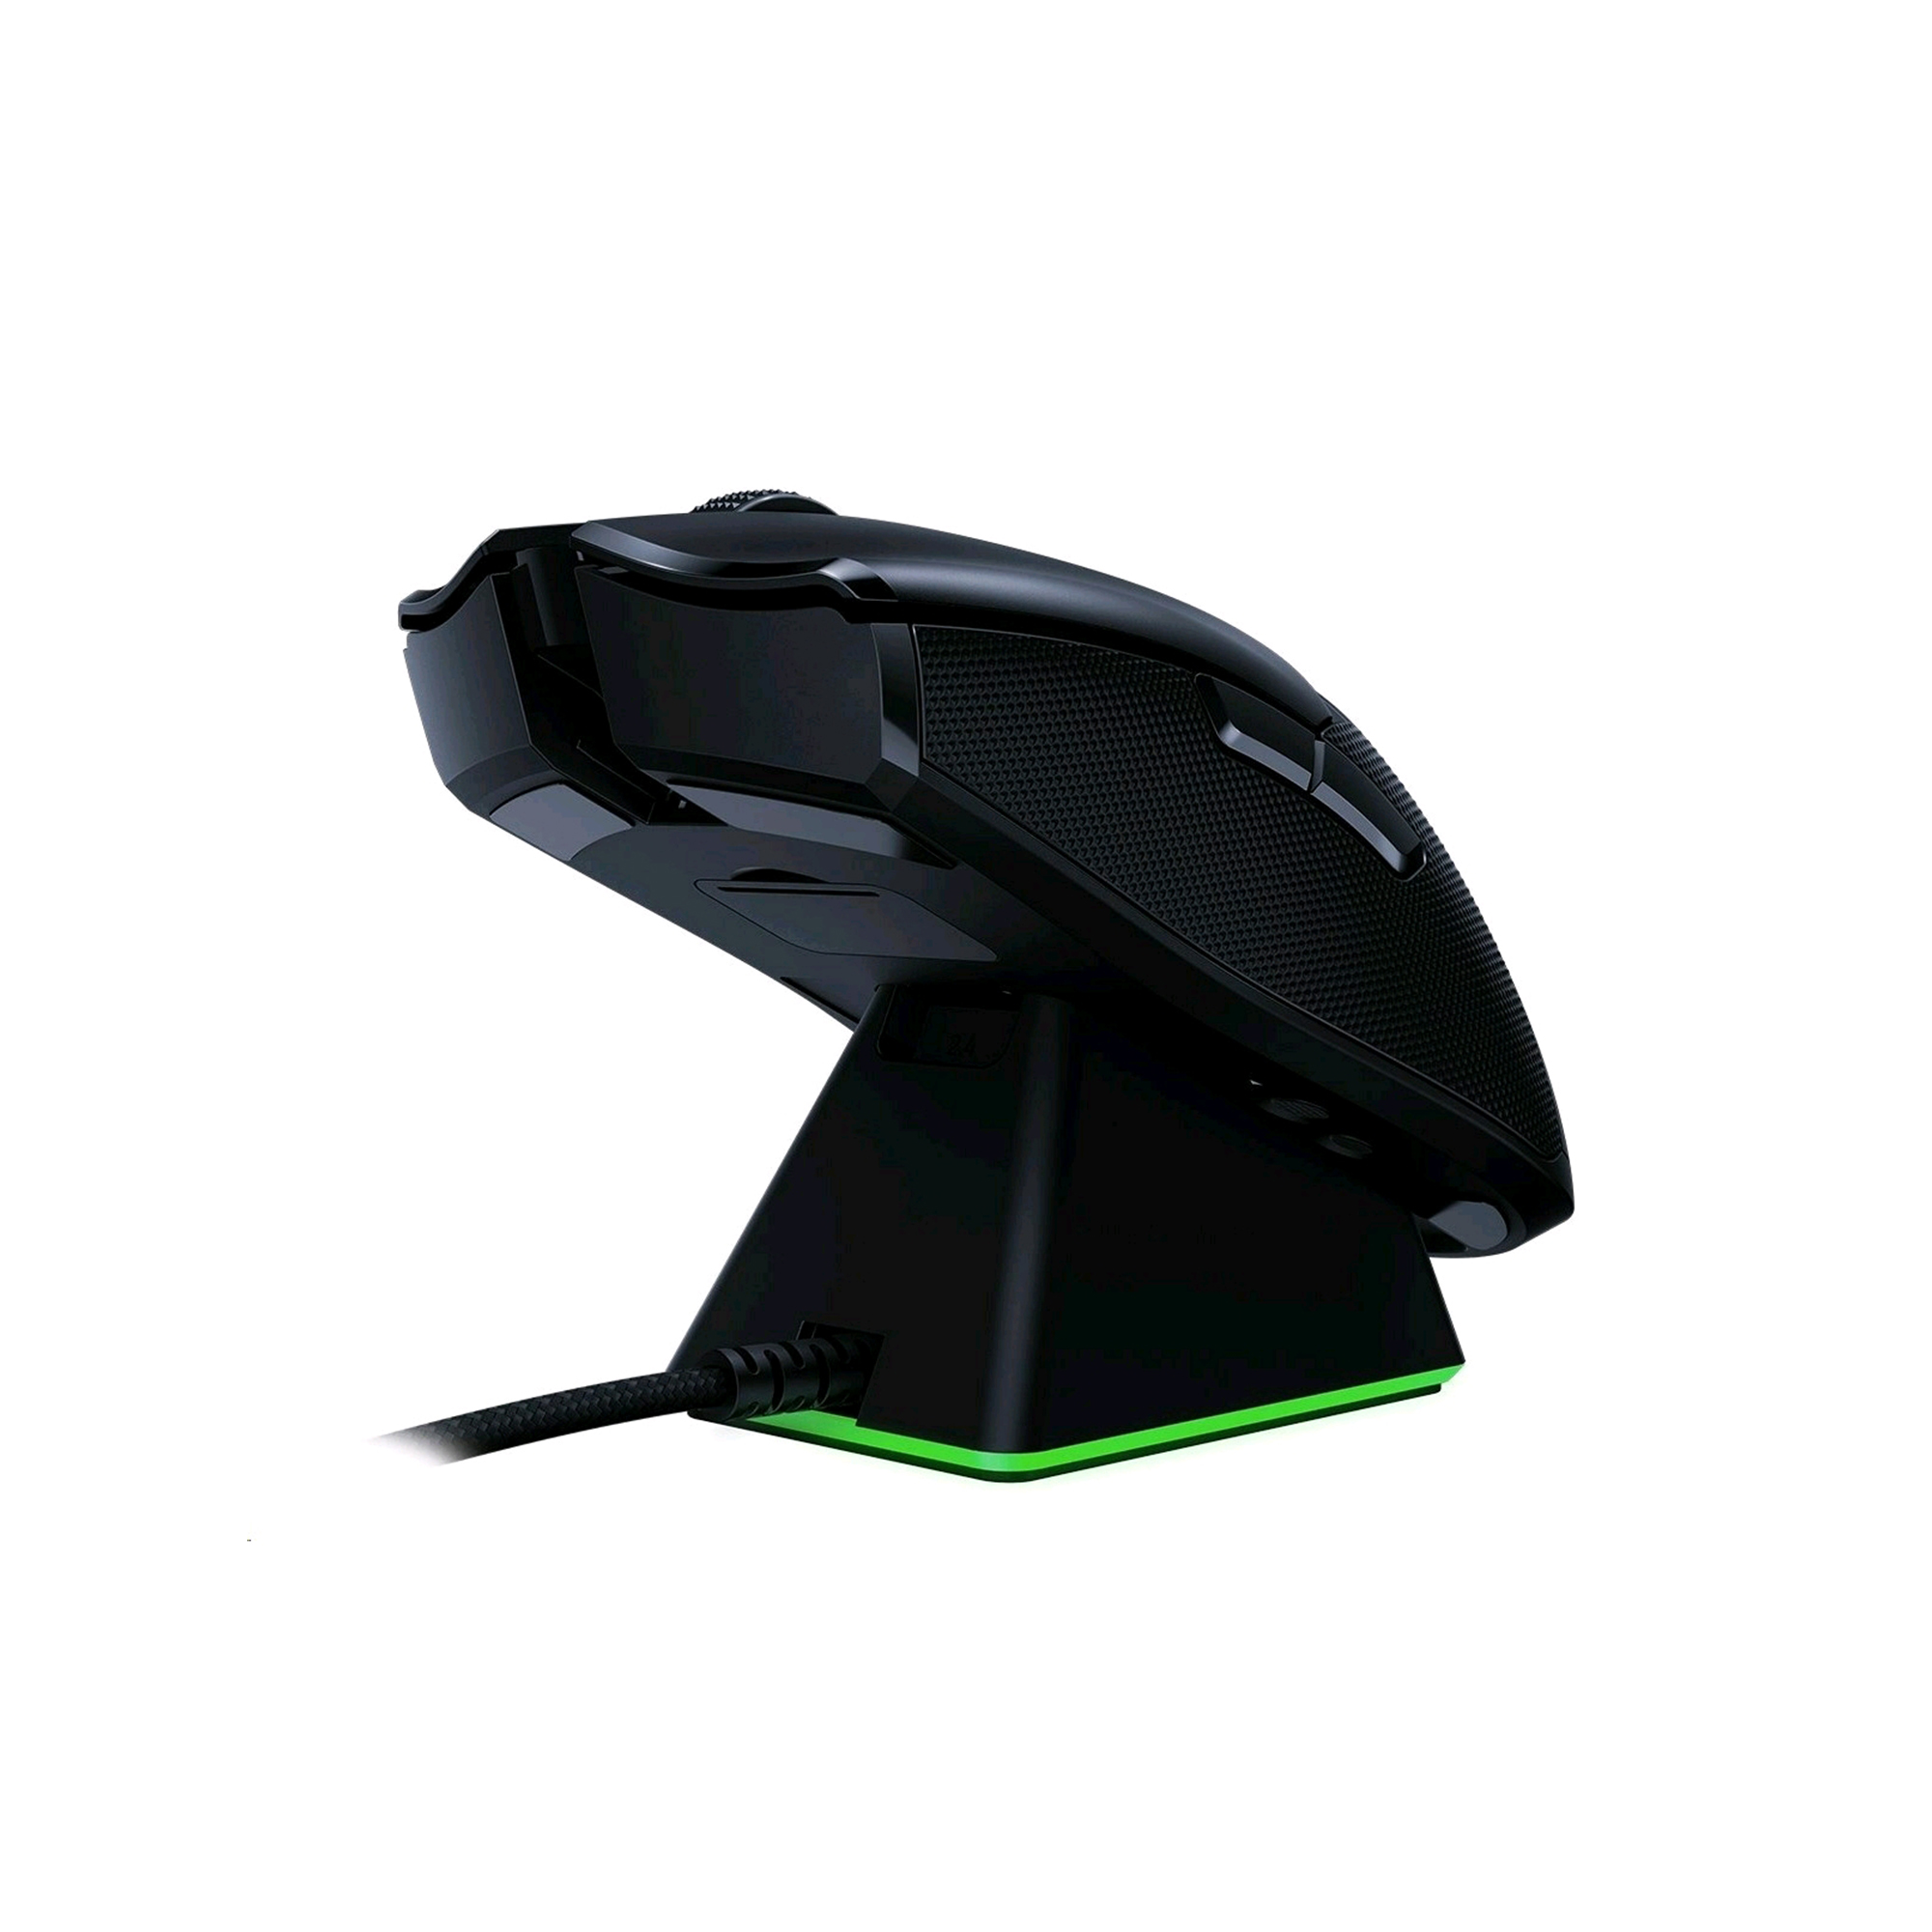 SALE] Razer Basilisk X HyperSpeed Wireless Gaming Mouse - Accenthub